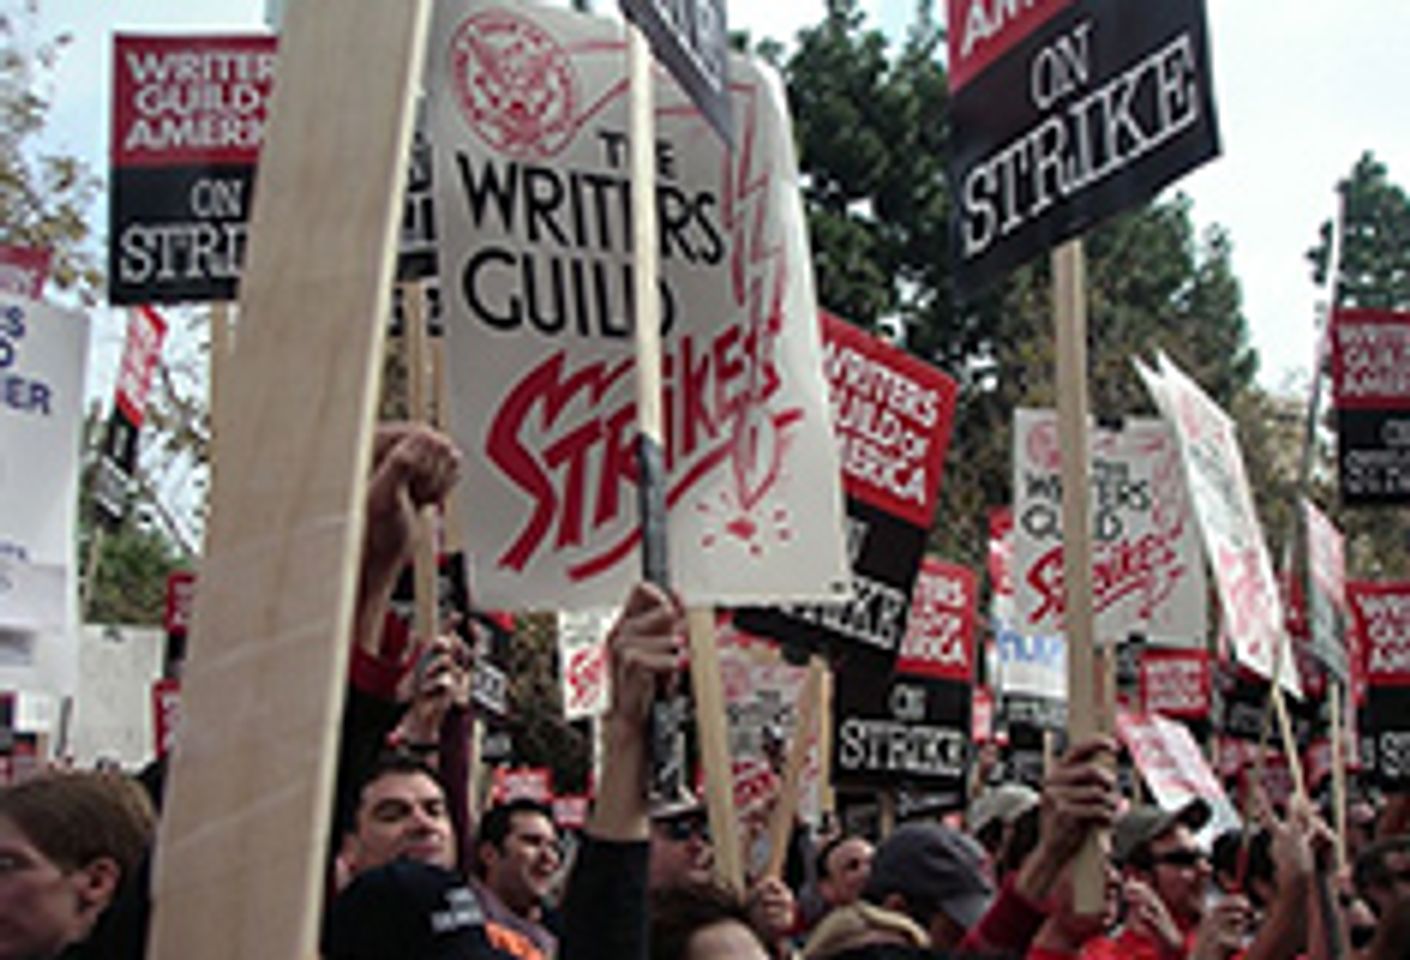 Babeland Offers Discount to Striking Writers Guild Members